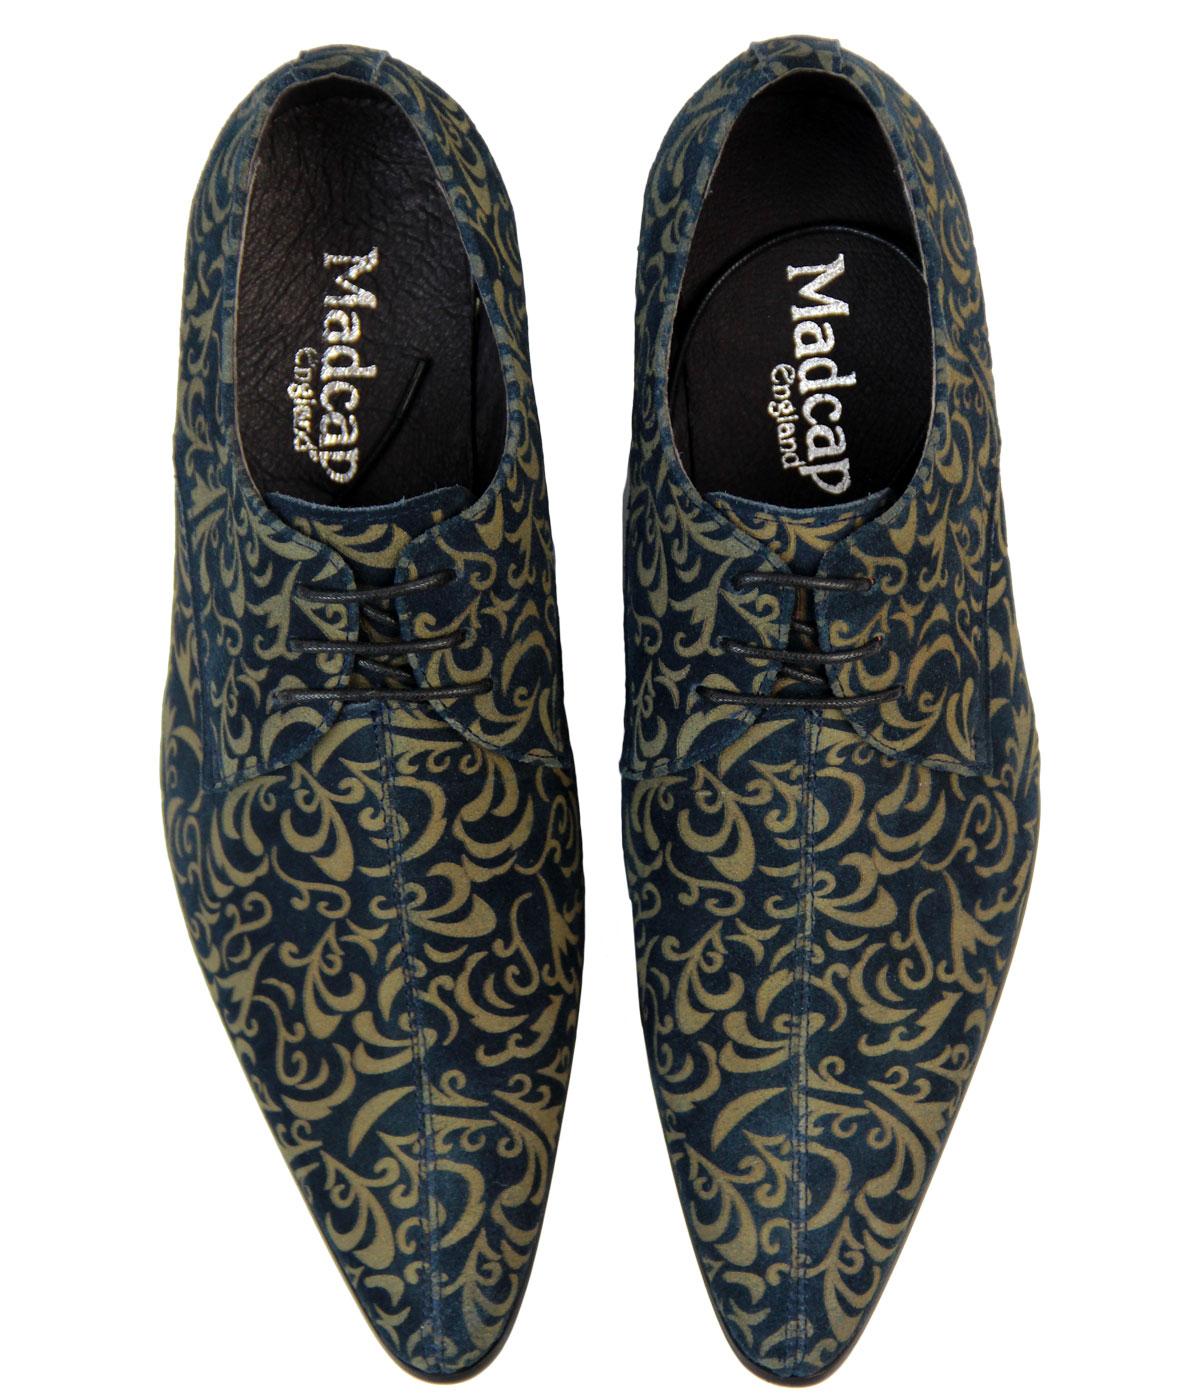 NEW MADCAP MOD RETRO MOD SIXTIES PAISLEY SUEDE SHOES Winklepickers 60s JAG RED 